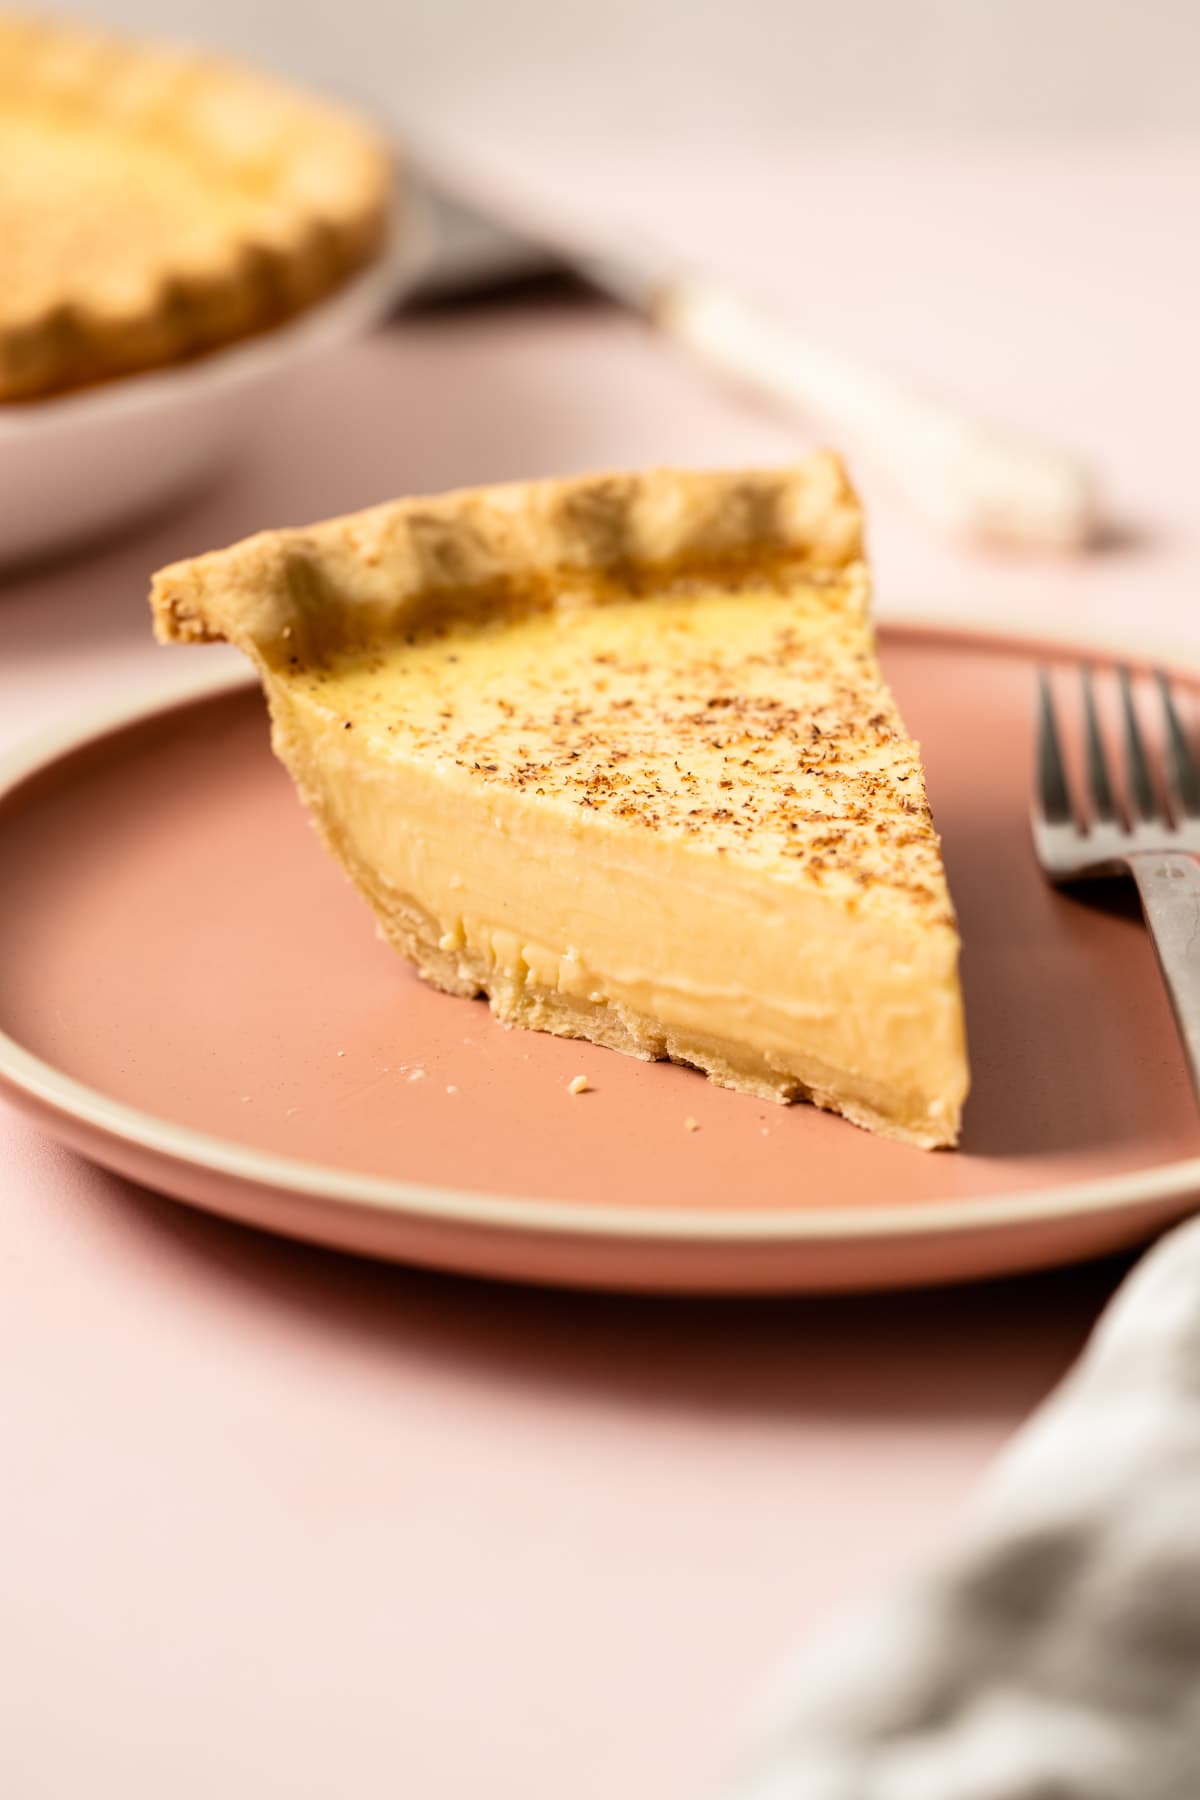 A slice of classic custard pie on a pink plate.